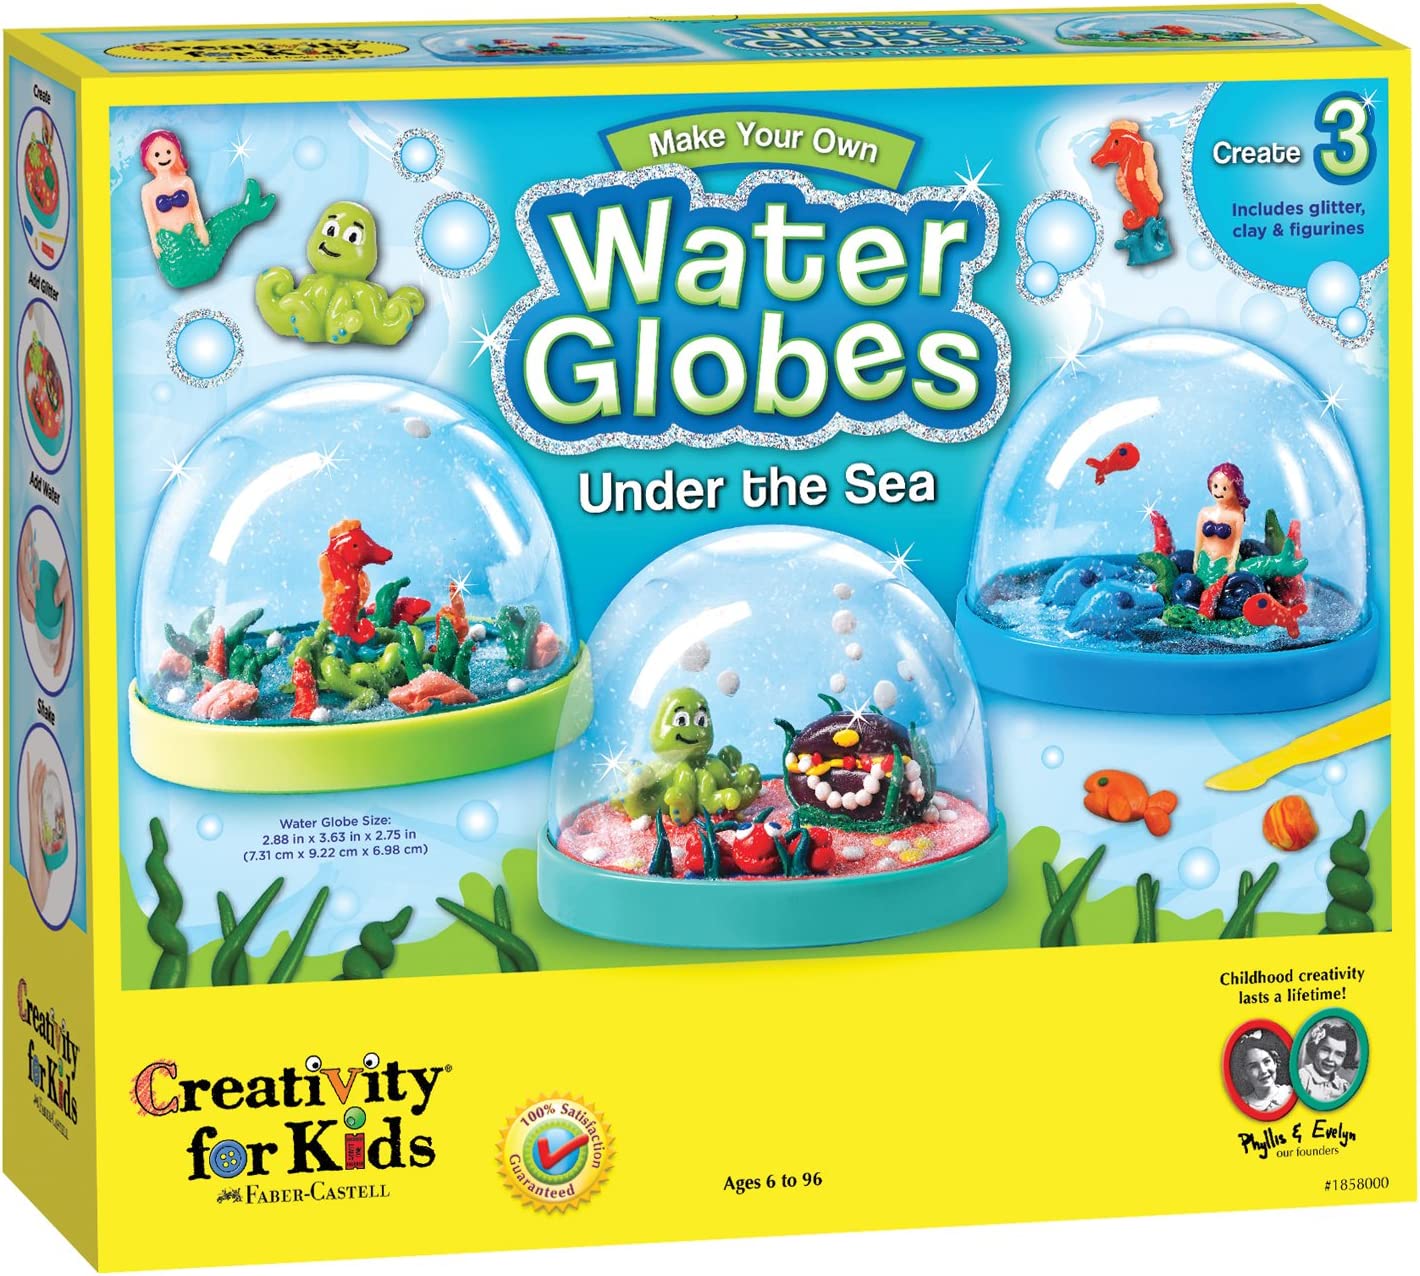 Creativity for Kids Make Your Own Water Globes - Under the Sea Snow Globes